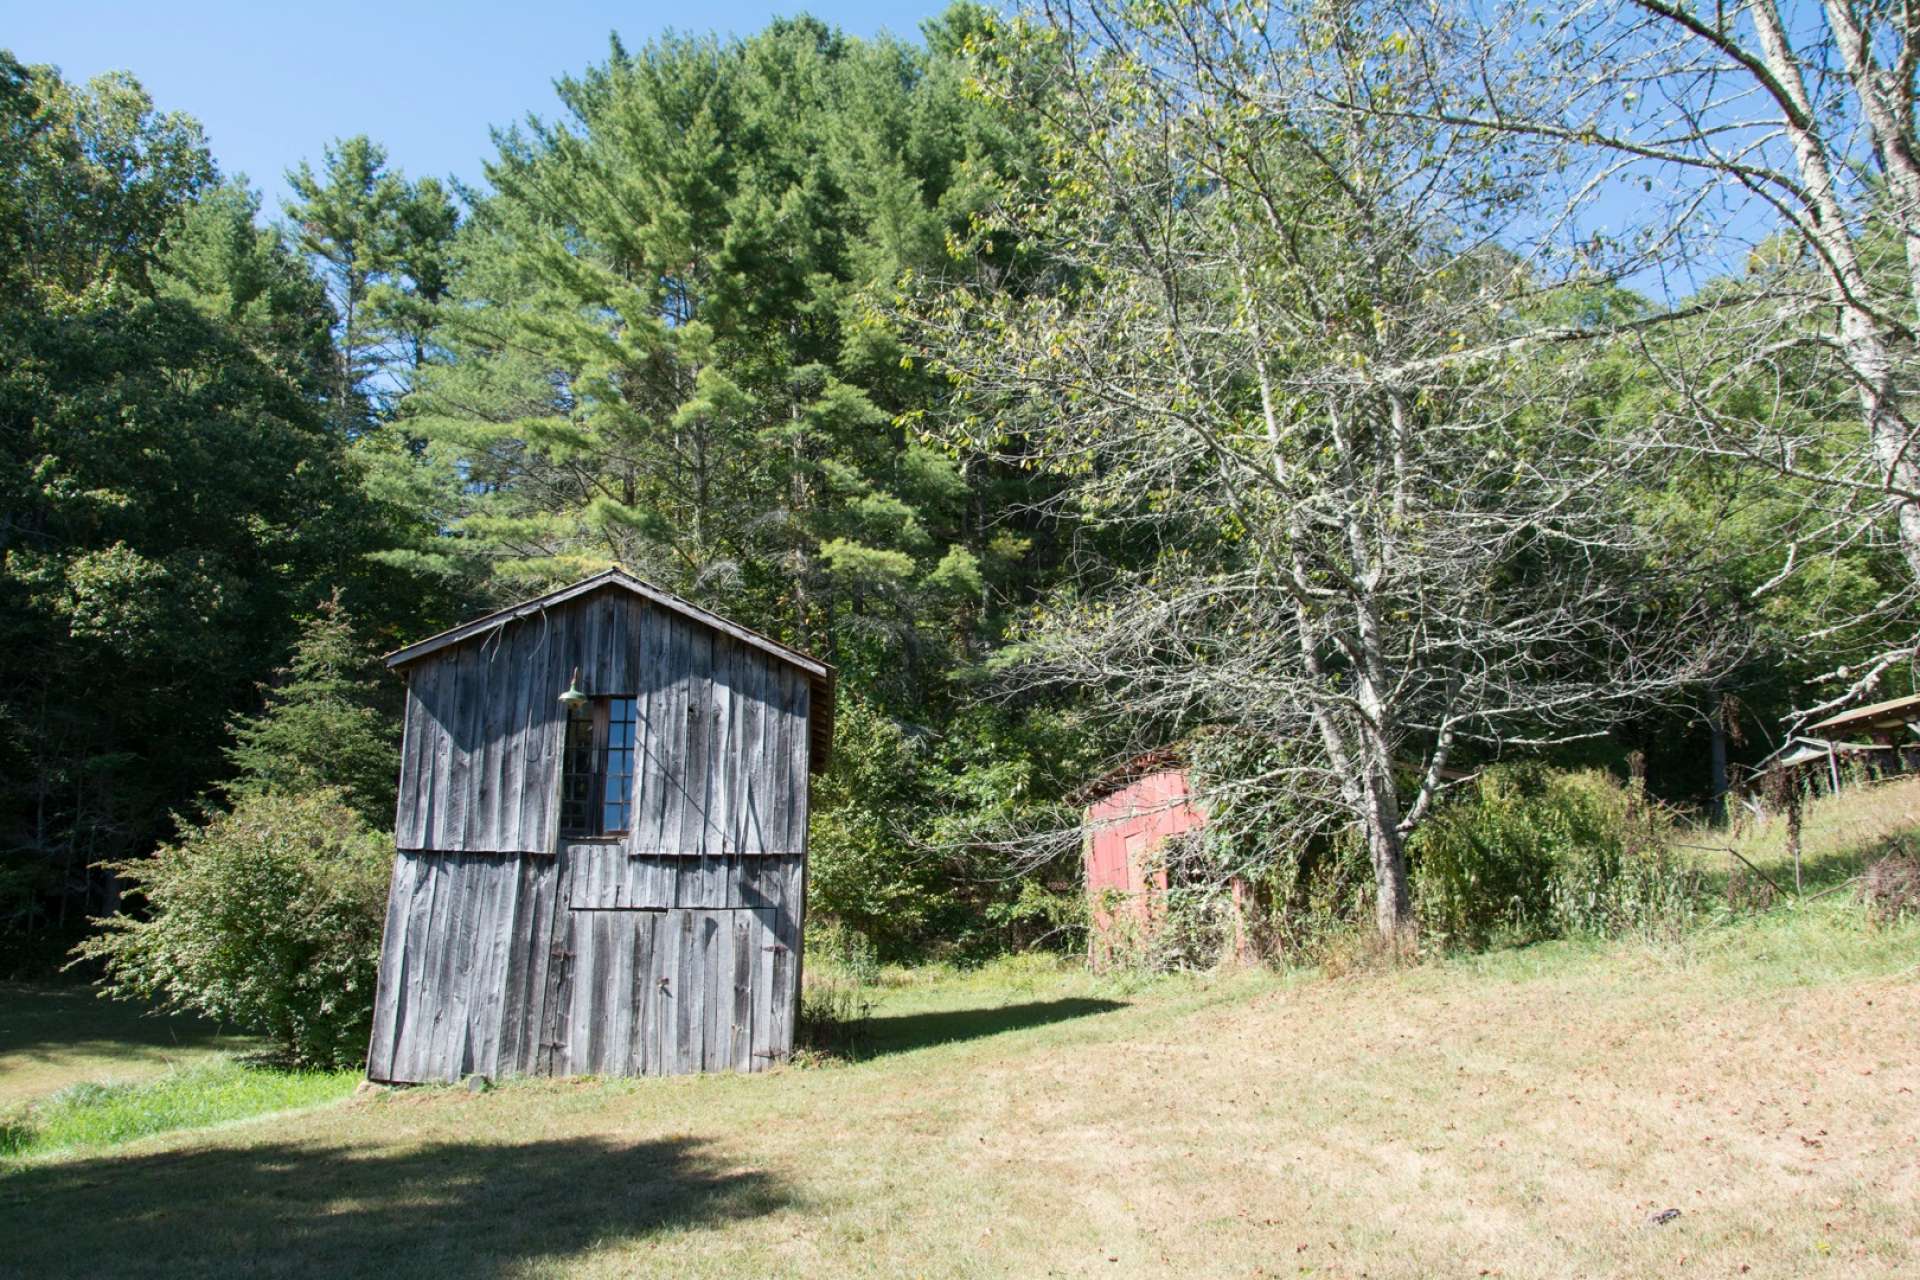 This farm also offers several outbuildings, open pastures, stream, apple trees, grapevines and the old farmhouse that can be restored, or choose one of the multiple potential building sites to construct your new mountain home.